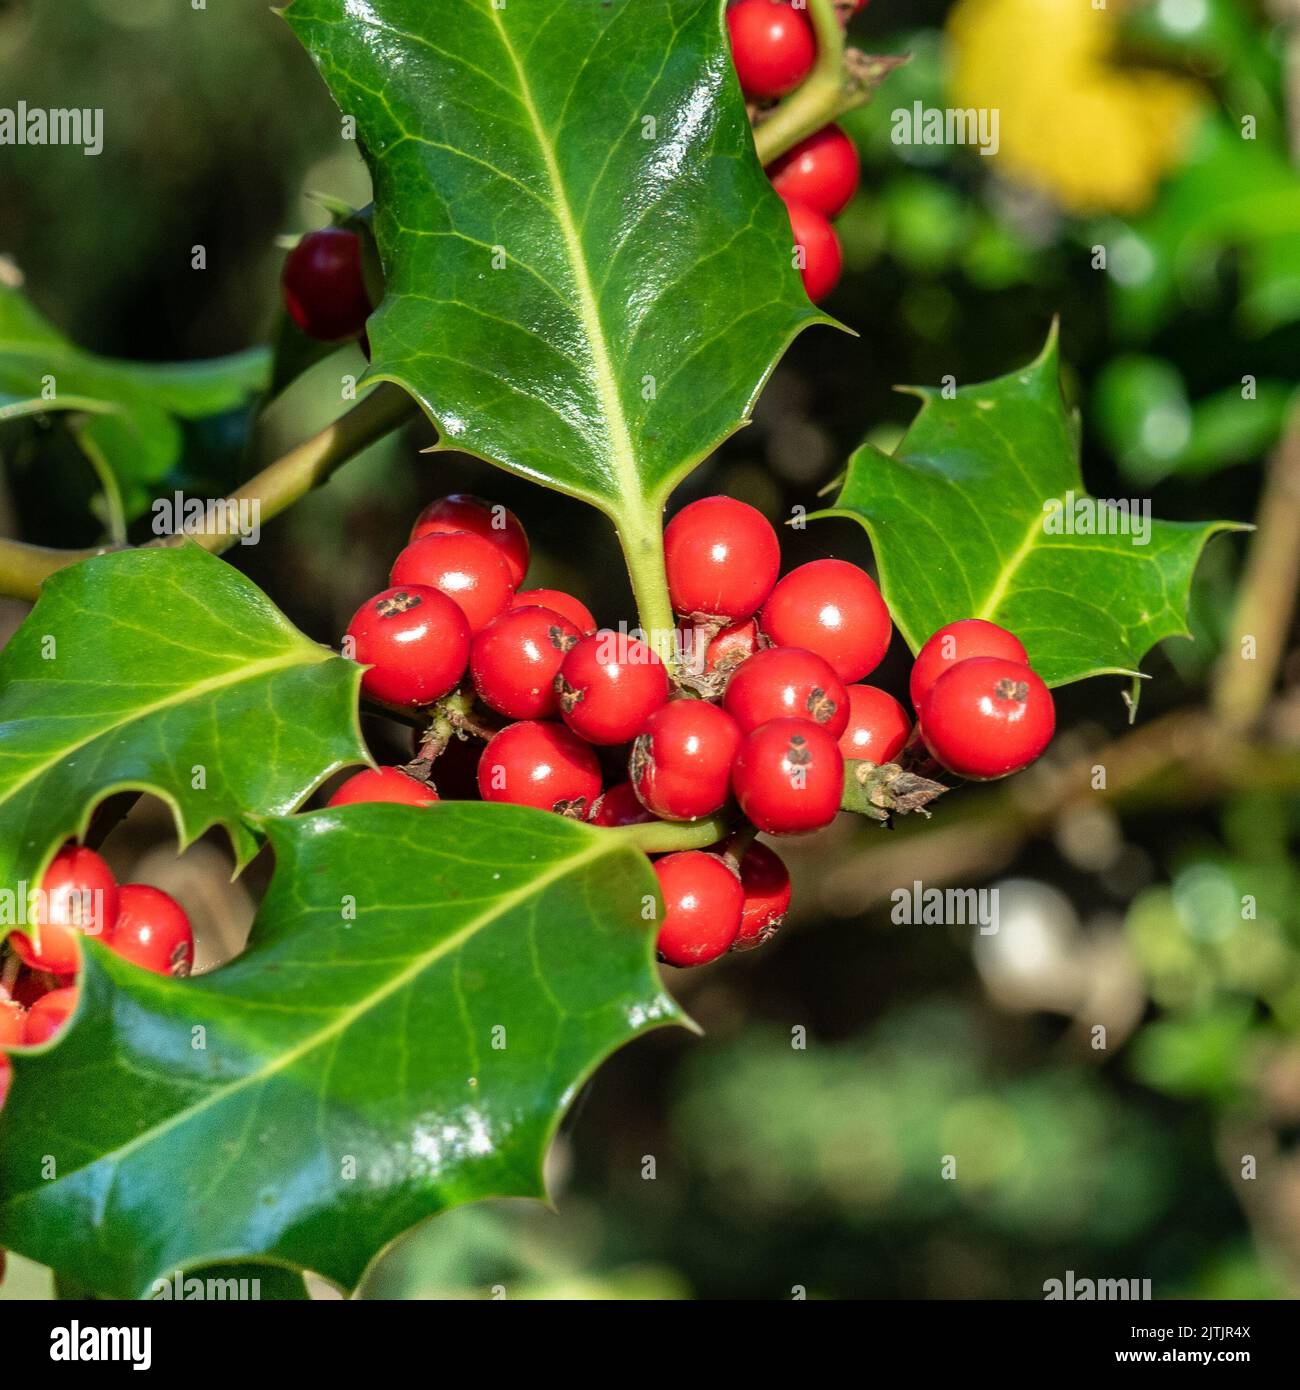 A group of bright red red holly berries surrounded by shiny green holly leaves Stock Photo